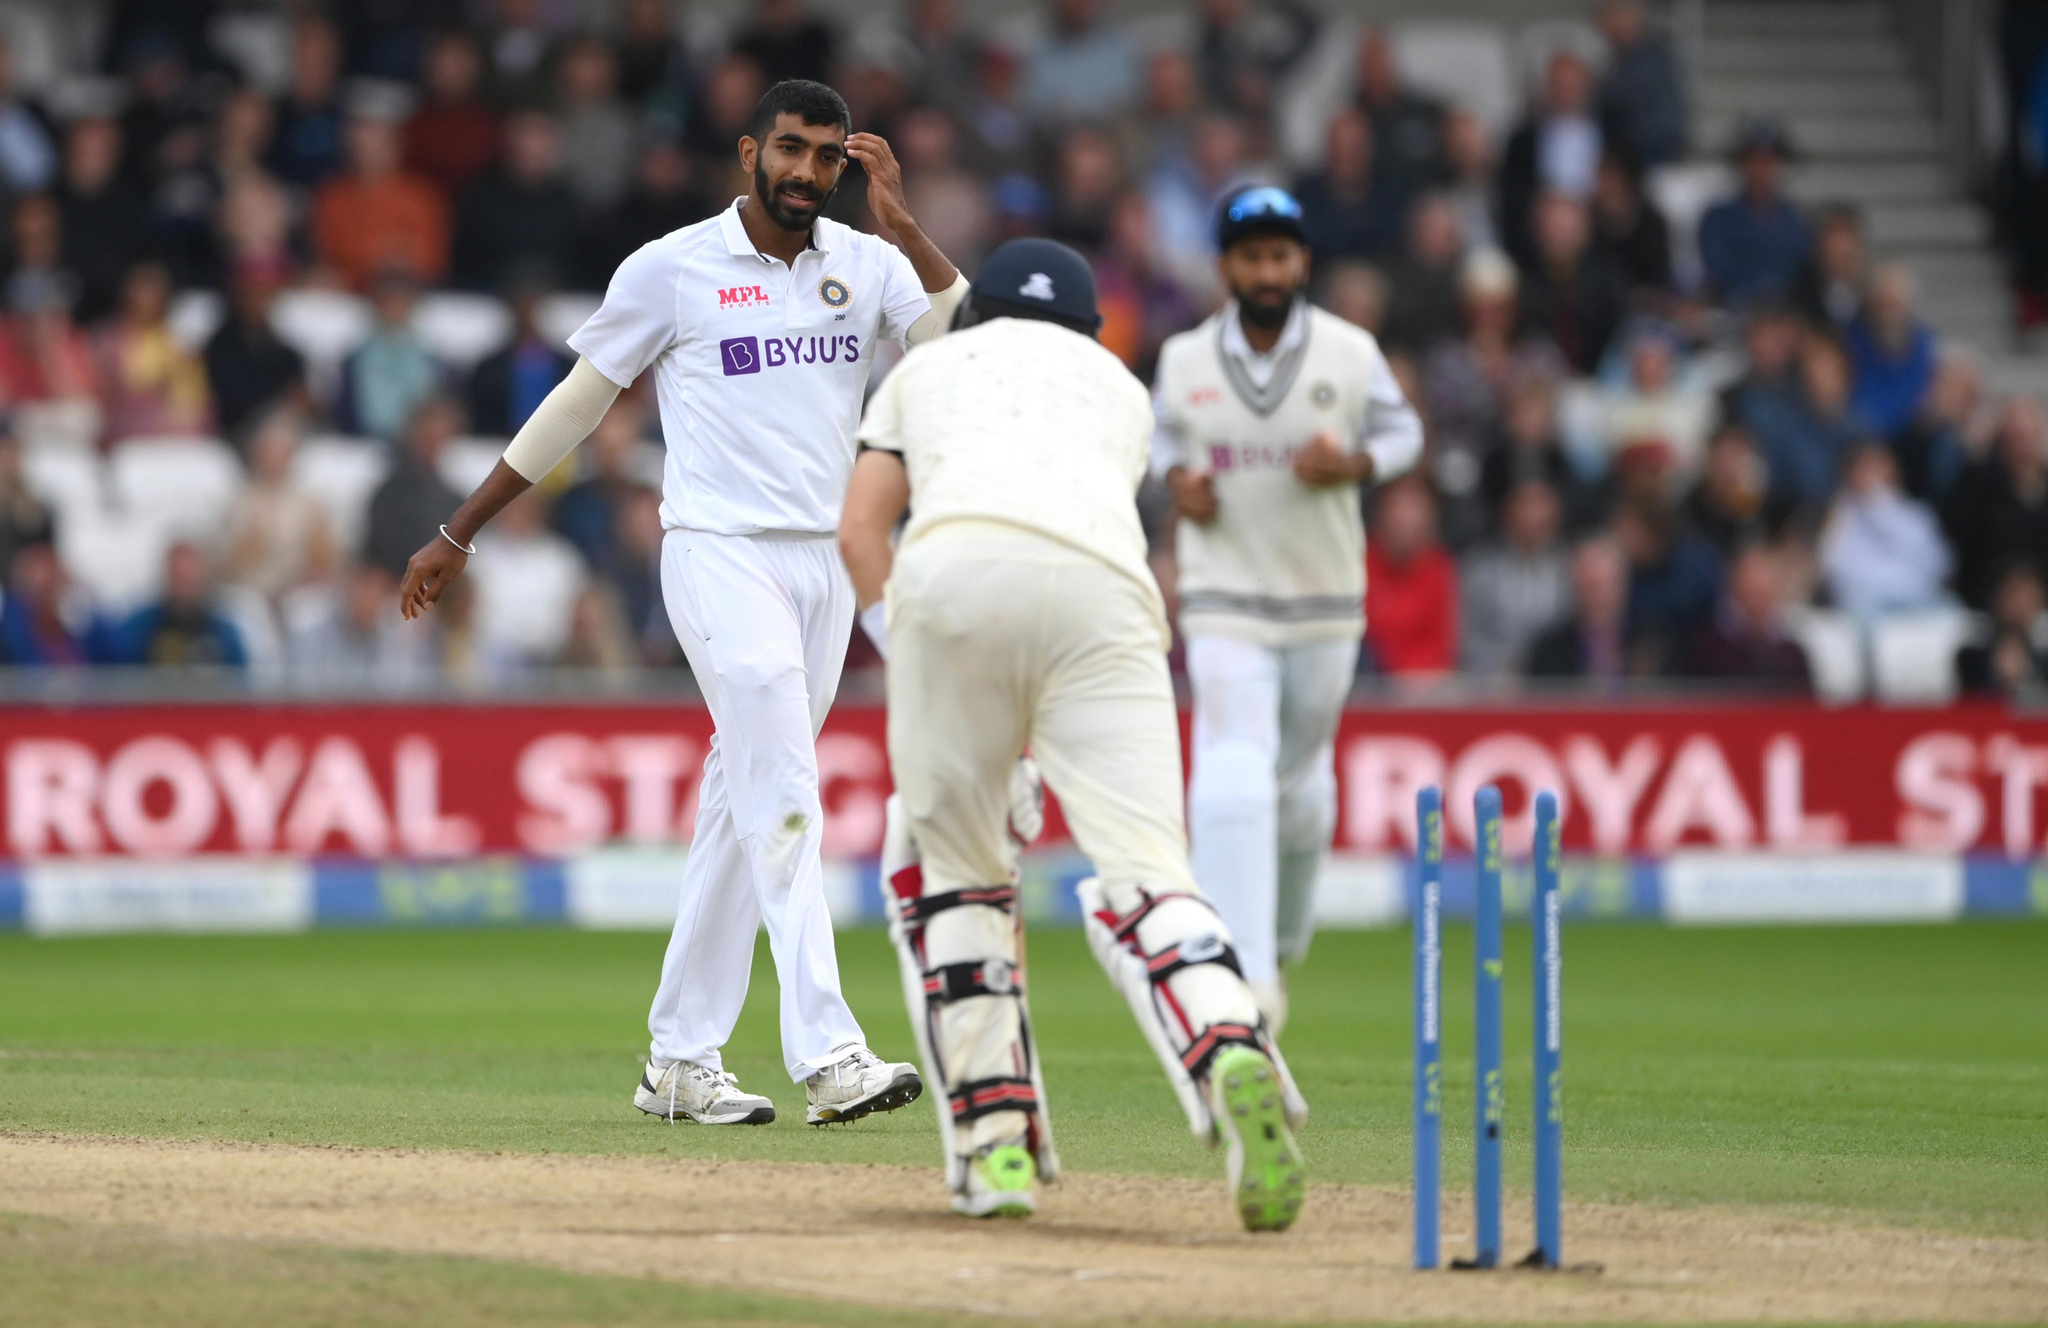 ENG vs IND 2021 Watch: Joe Root Falls To Jasprit Bumrah After 121-Run Knock On Day 2 of Headingley Test